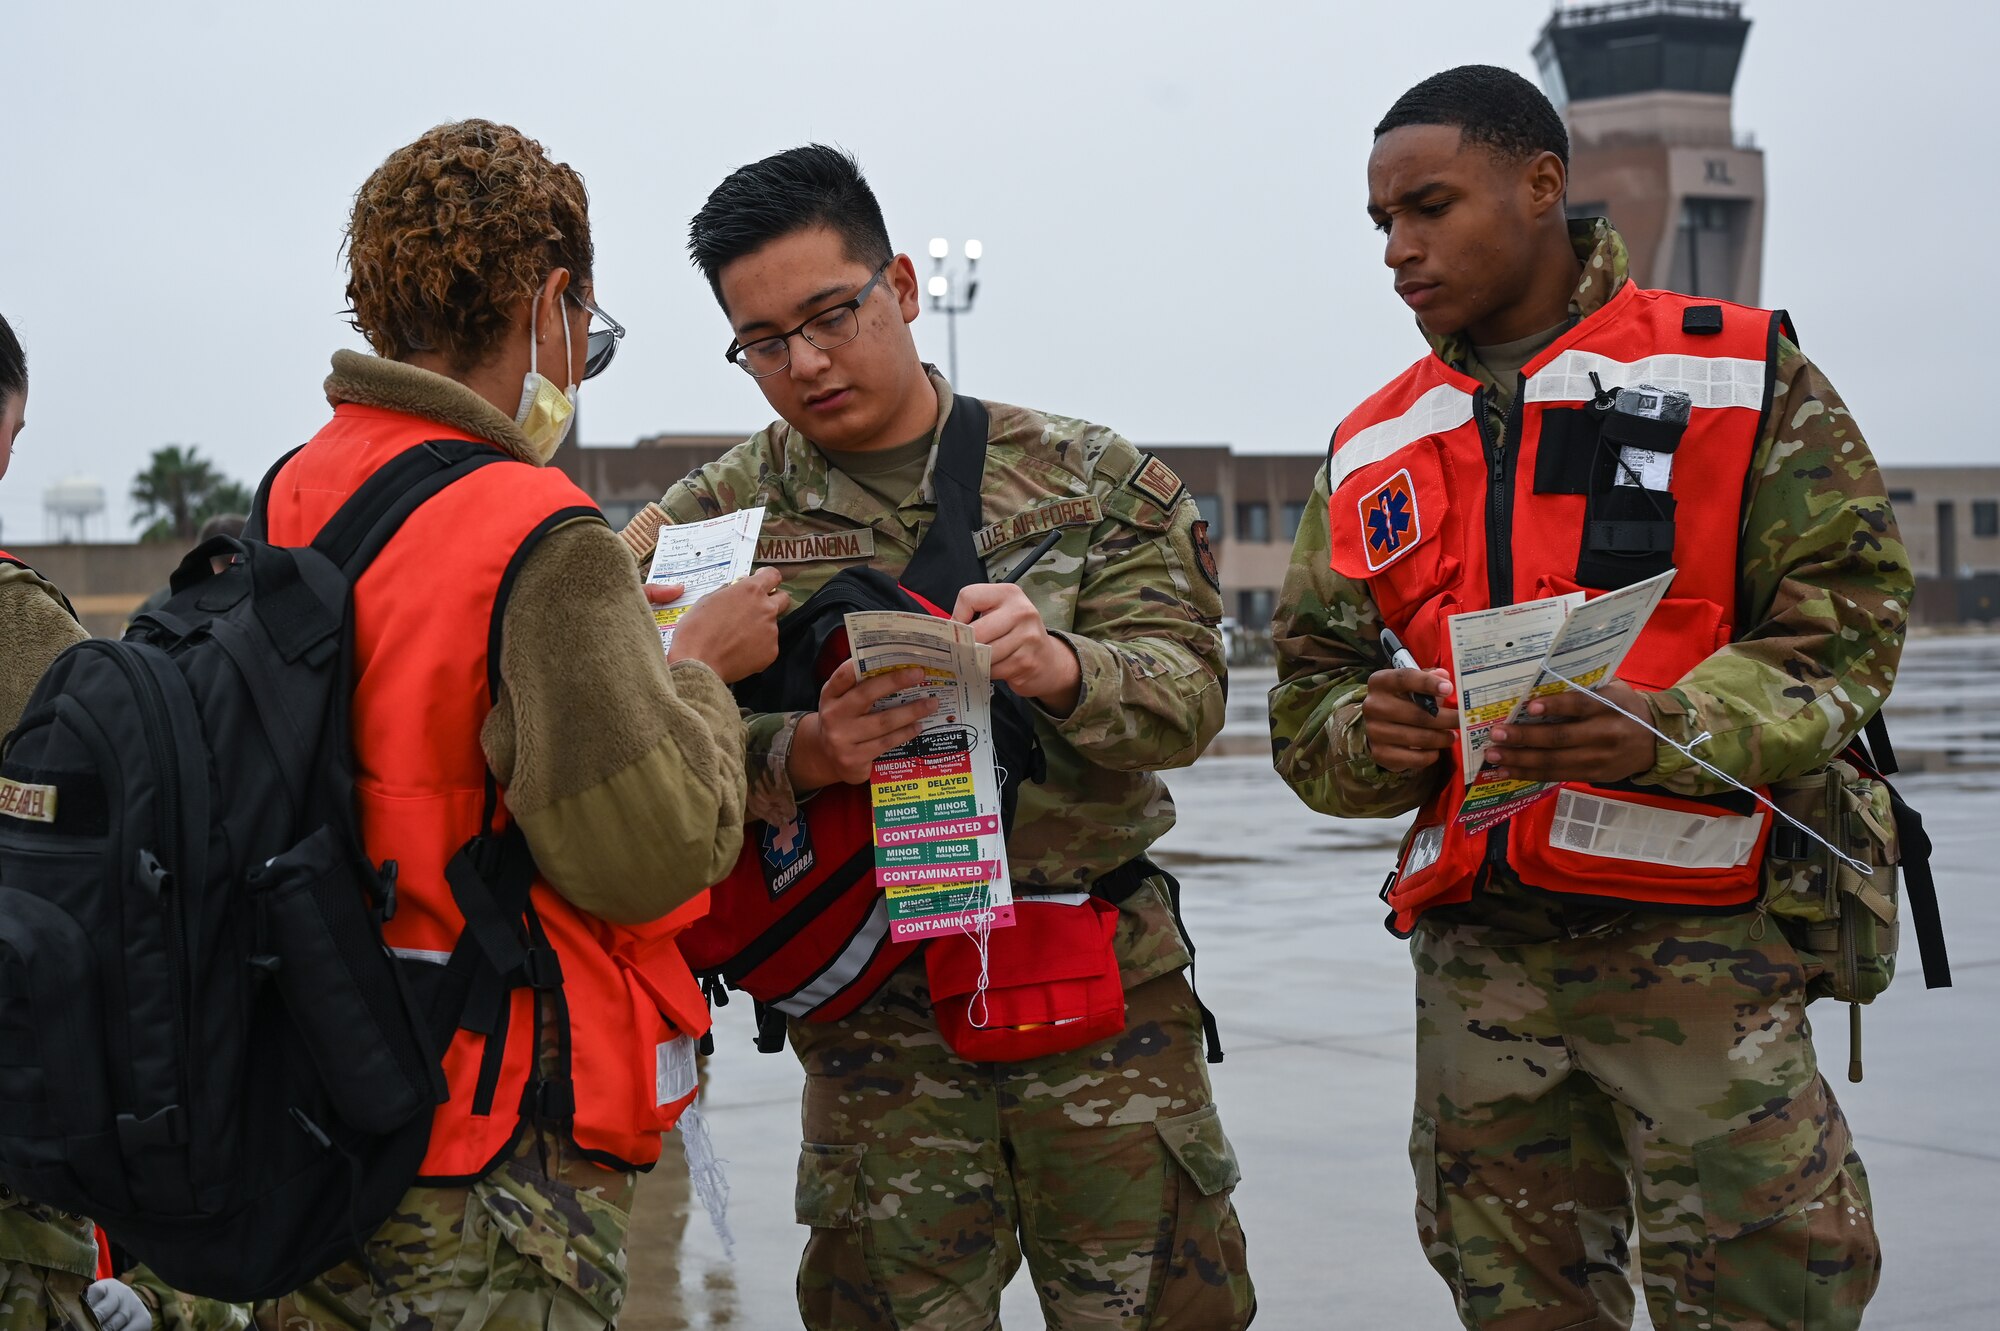 U.S. Air Force Airman 1st Class Ashley Beausoleil (left), 47th Medical Group health services management, Senior Airman Rico Mantanona (middle), 47 MDG health services management, and Senior Airman Dakamien Brown (left), 47 MDG referral management technician, compare patient injury cards during a Major Accident Response Exercise (MARE) on the flight line at Laughlin Air Force Base, Texas, Dec. 14, 2023